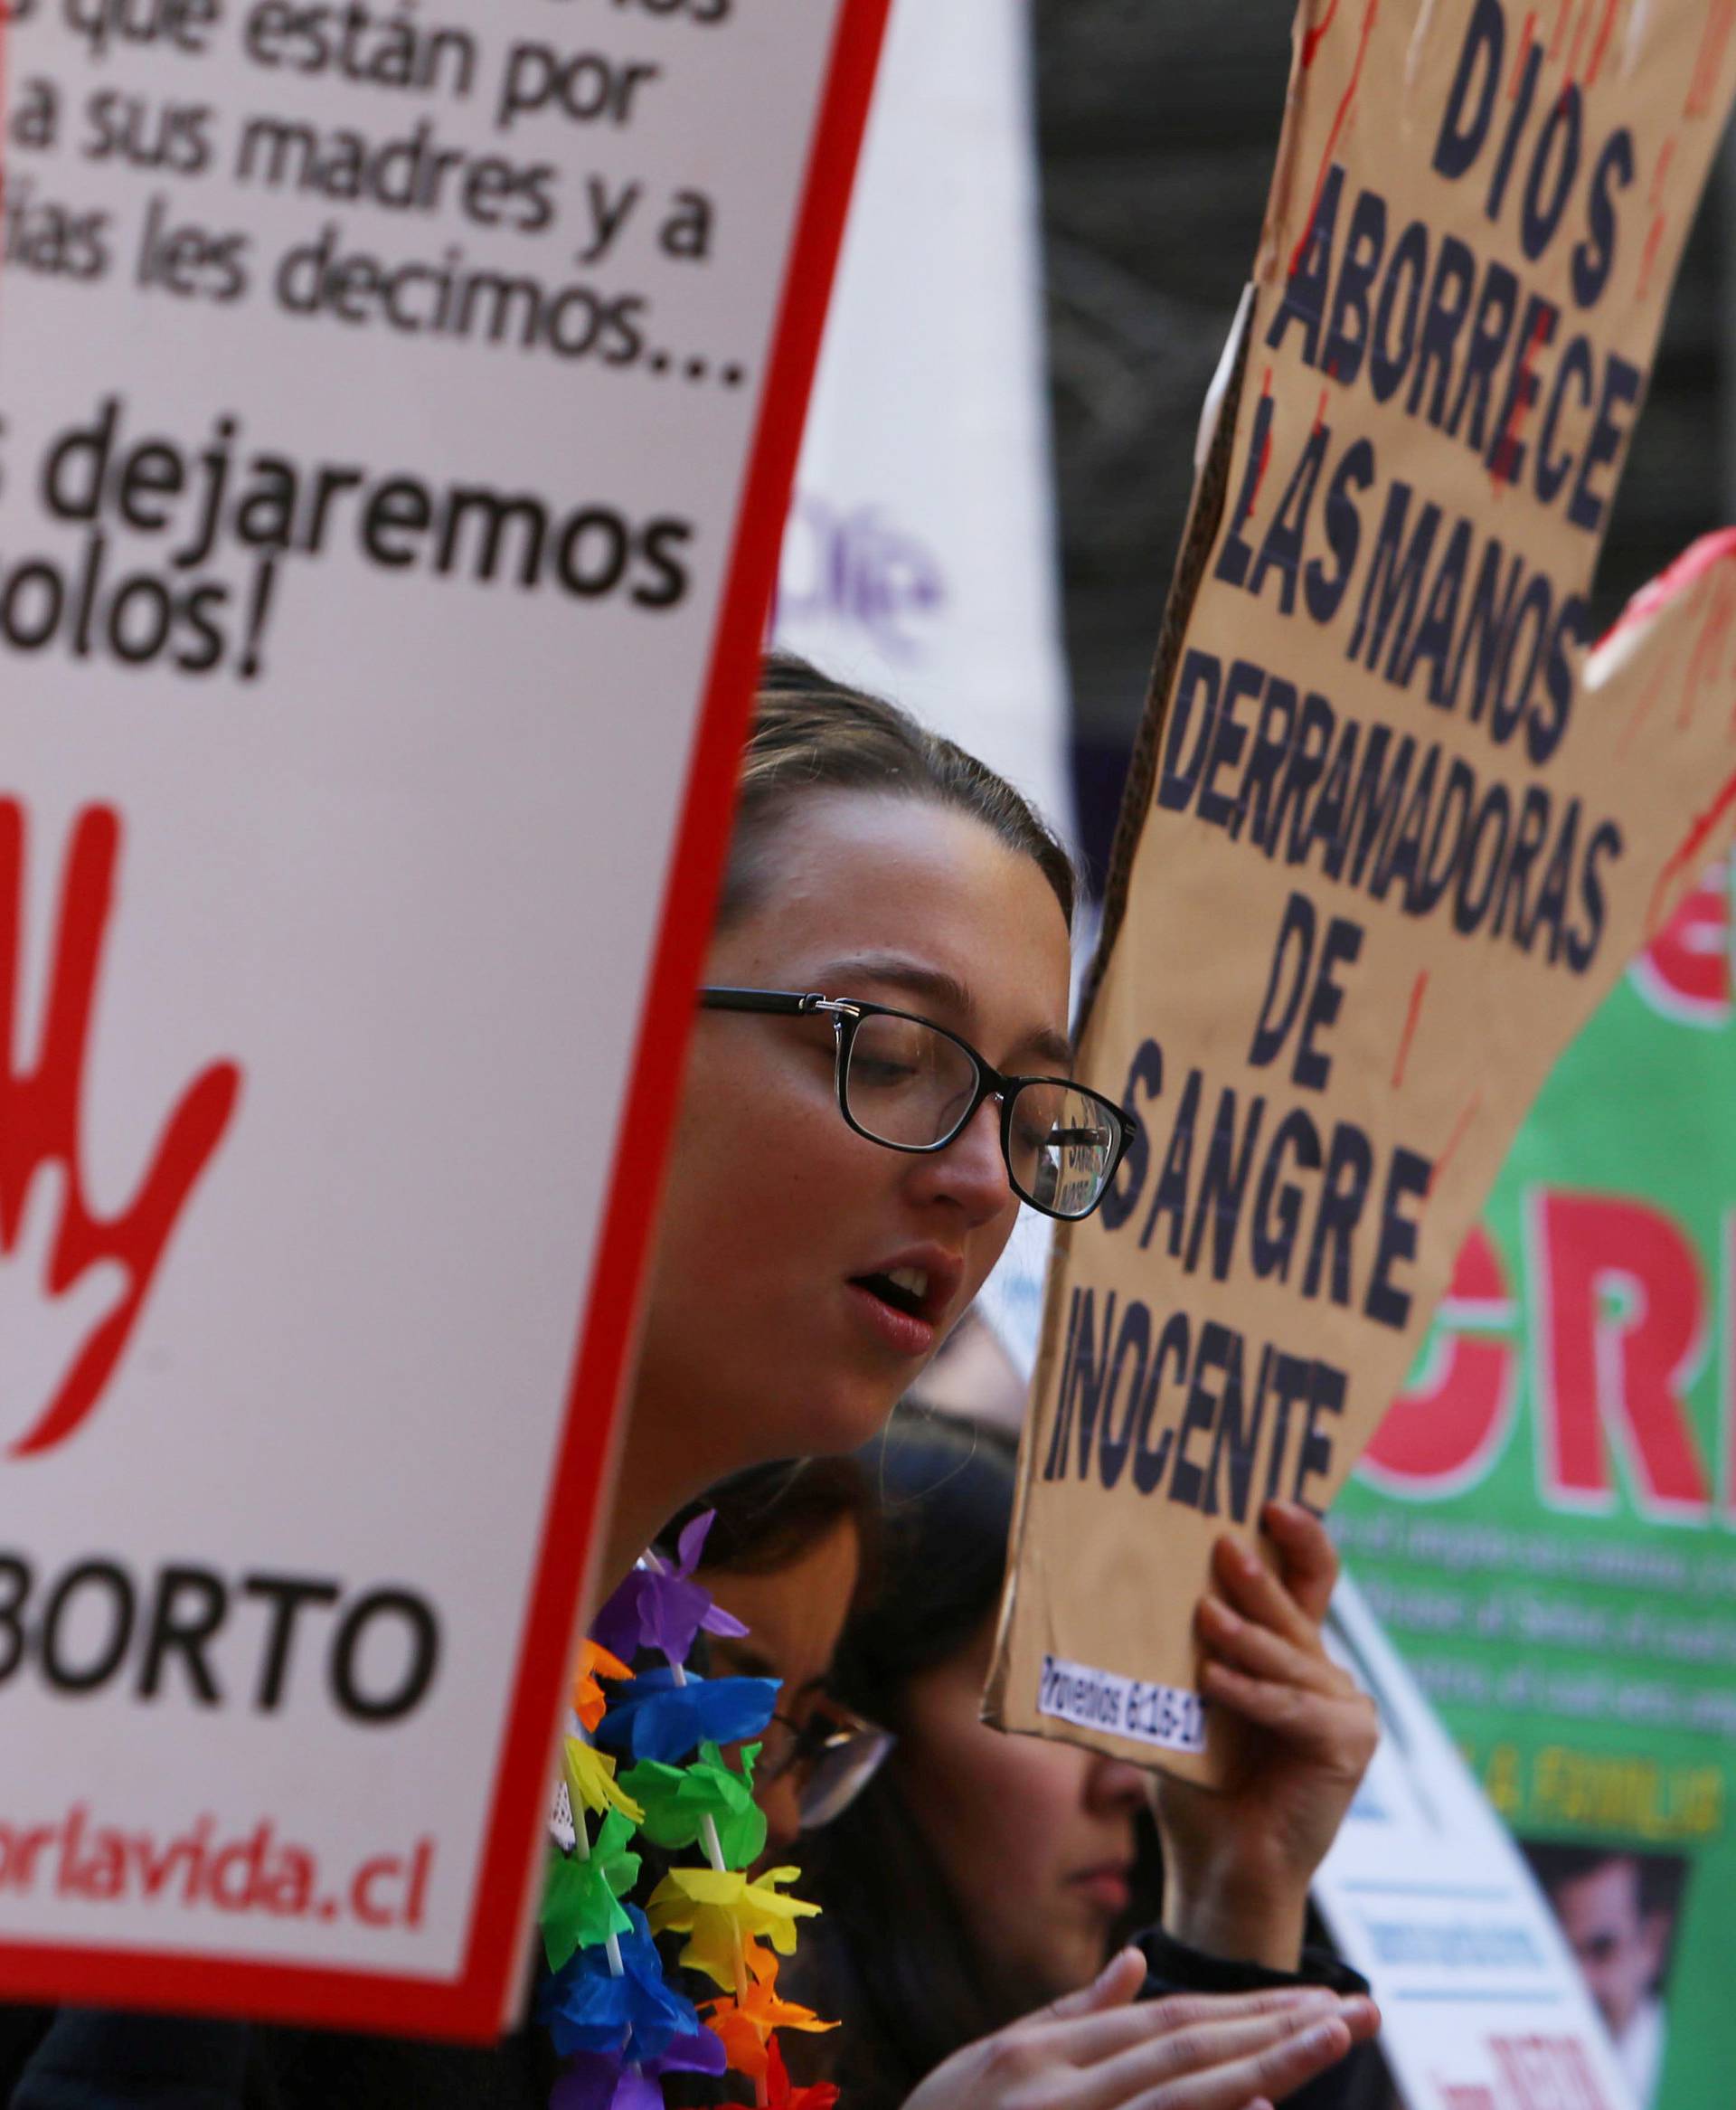 A demonstrator against abortion hold a placard in Santiago